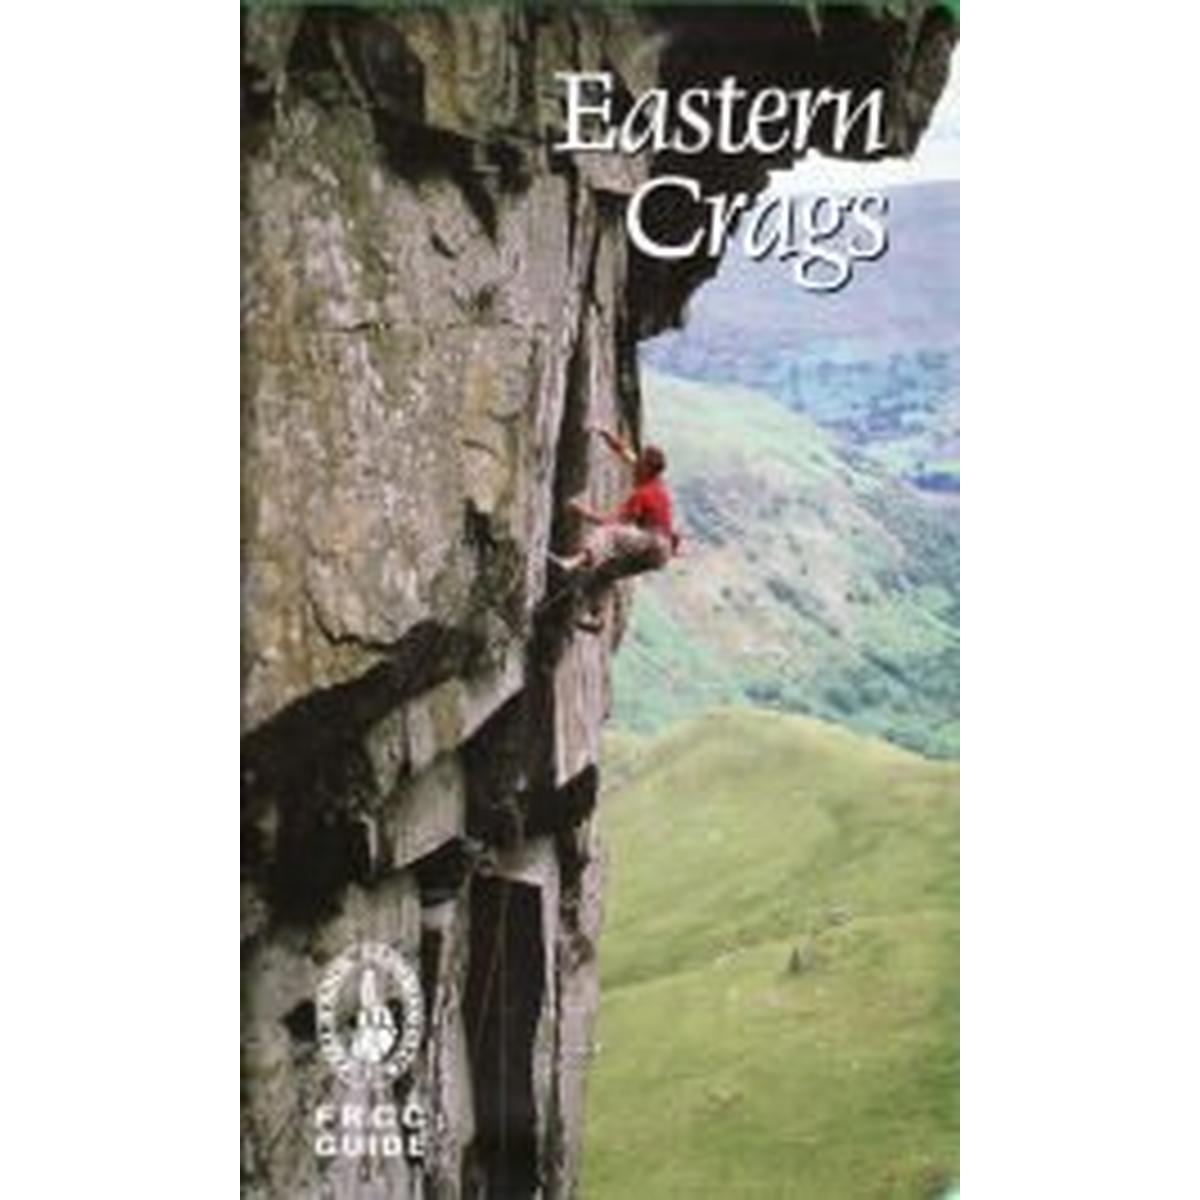 Cordee FRCC Climbing Guide Book: Eastern Crags